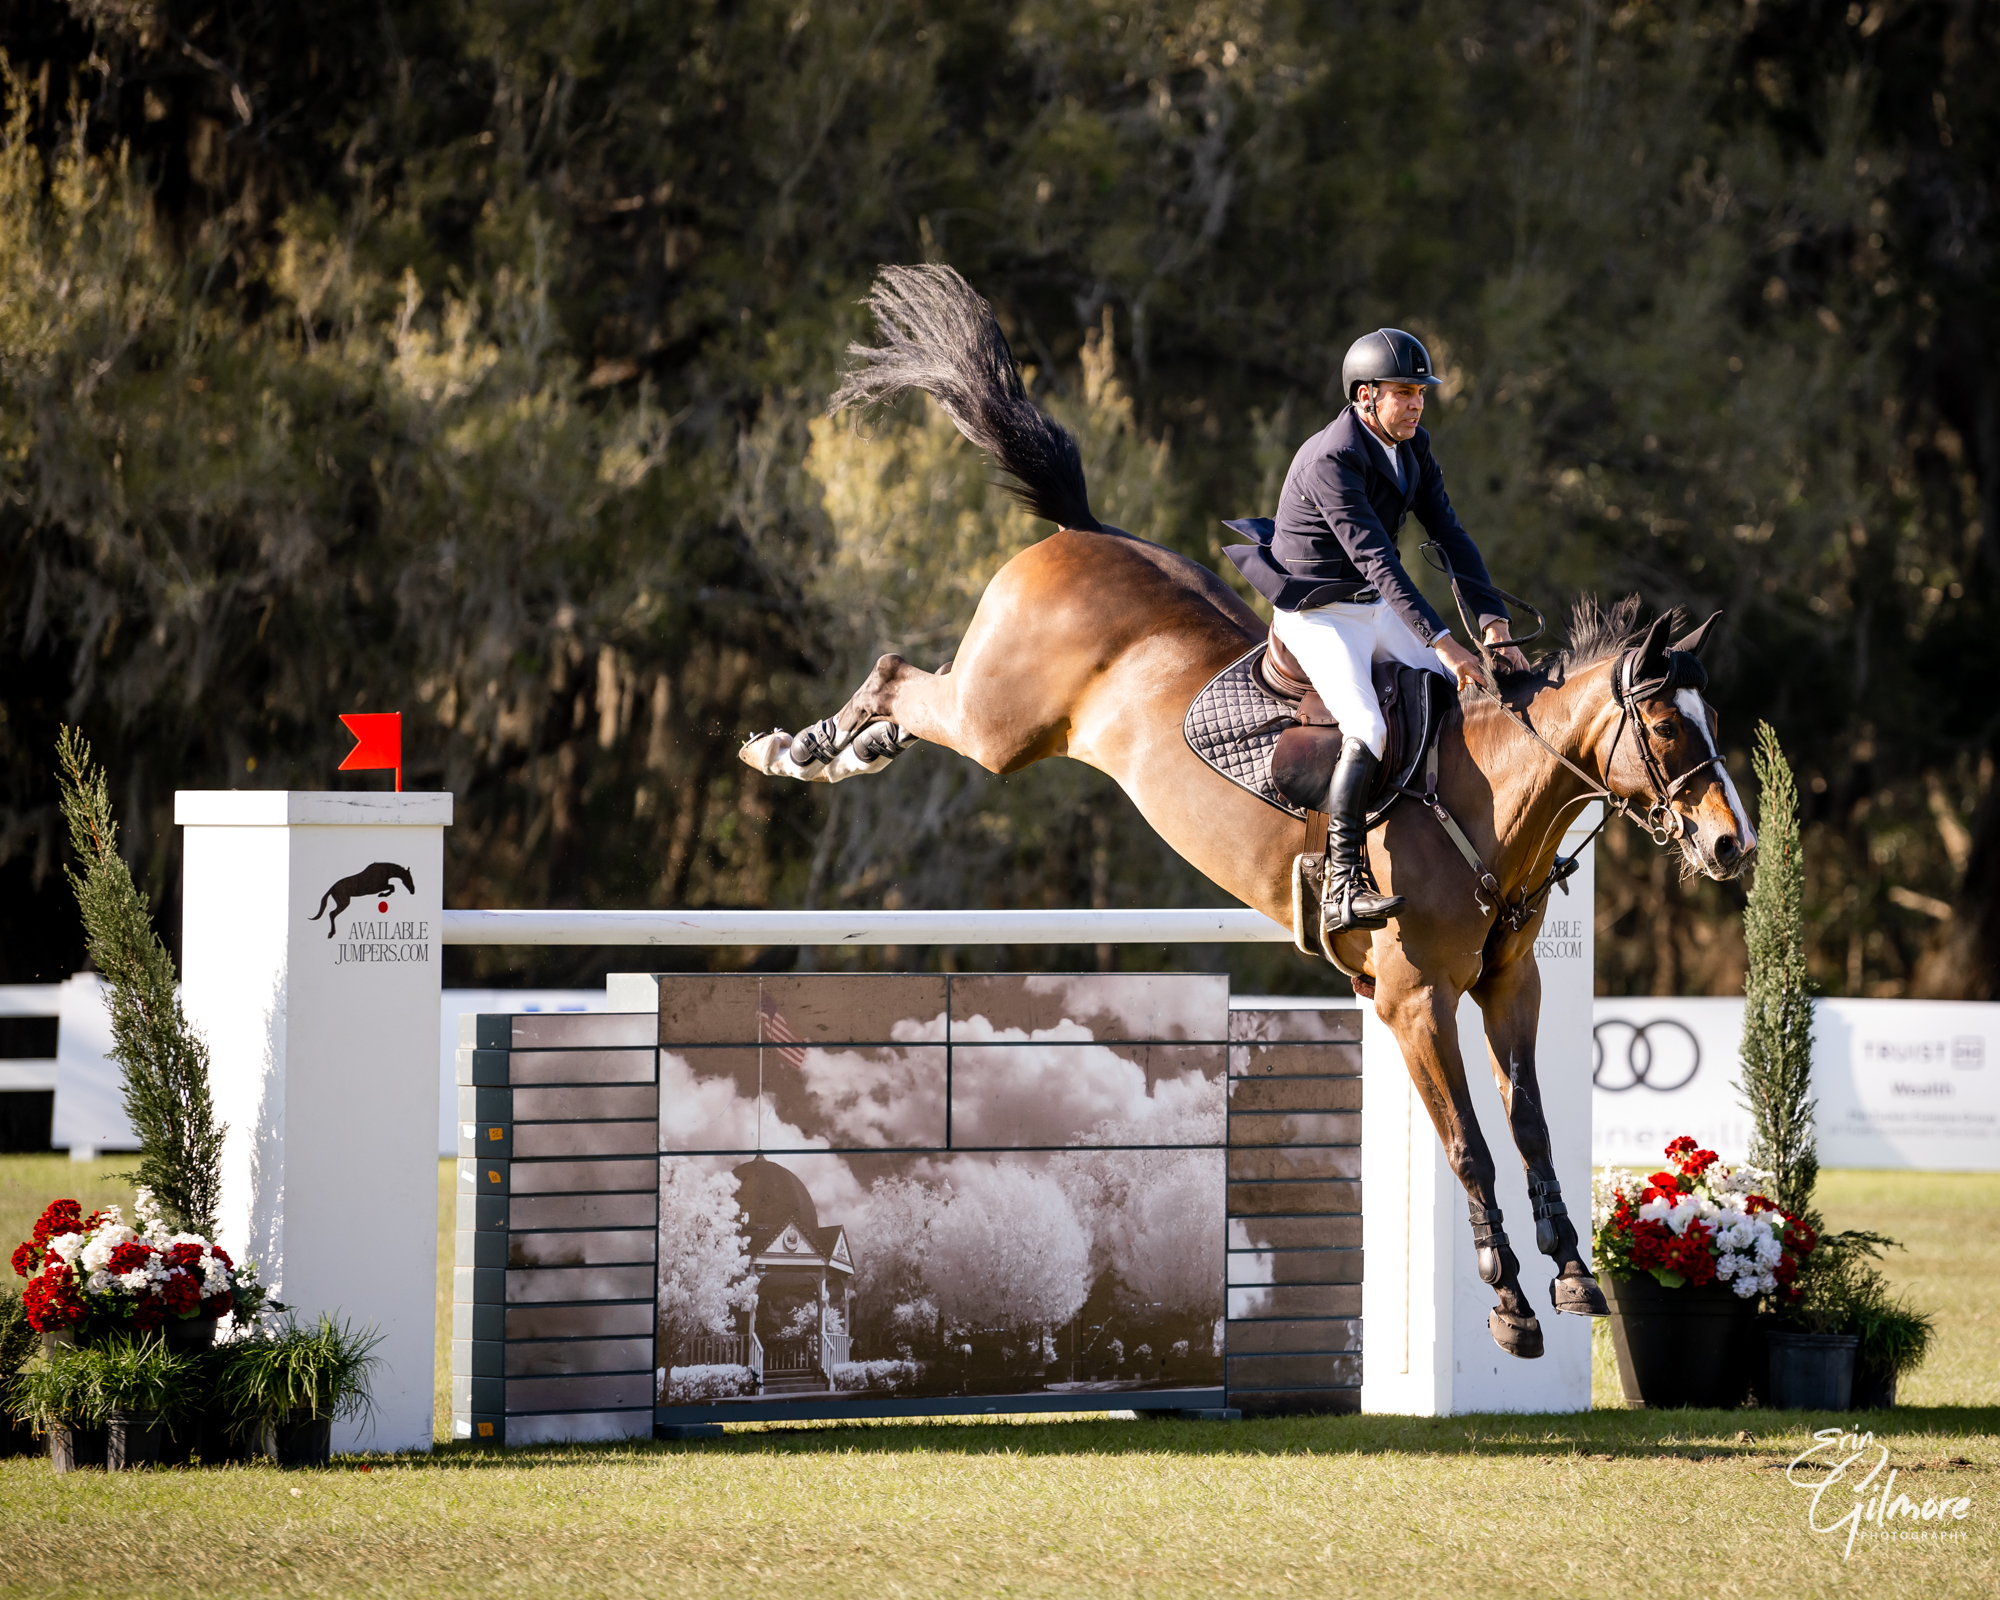 Riders and Horses for the Live Oak International CSI 4*-W